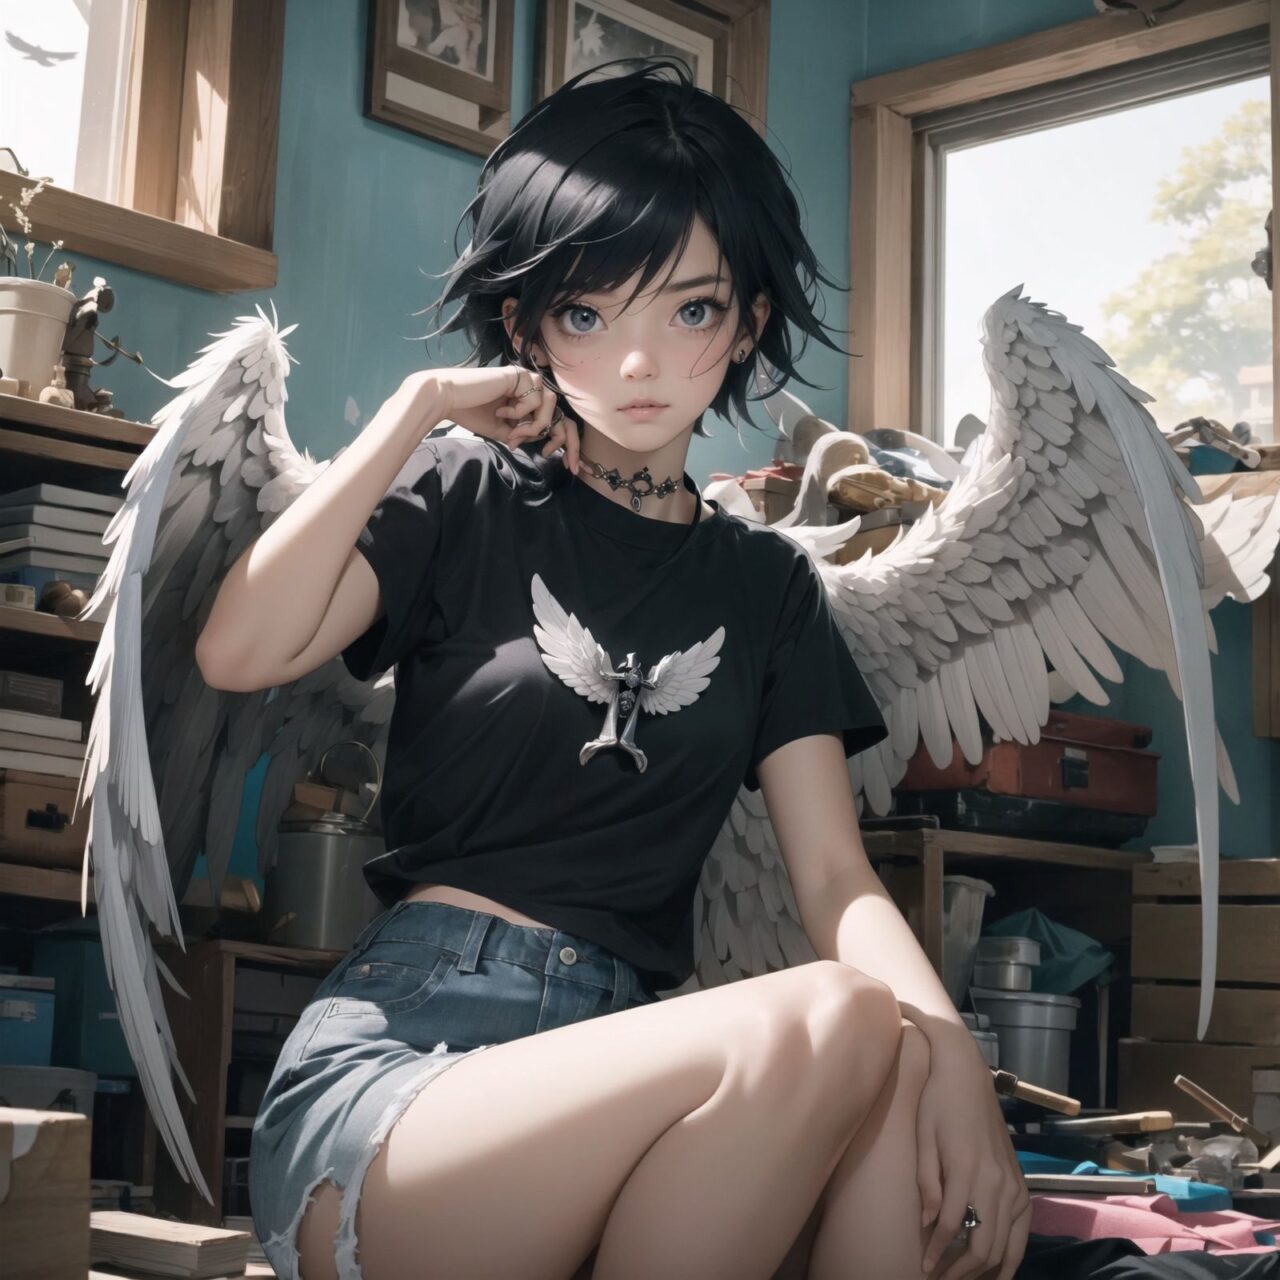 (Emo black angel: 1.5), angel ring and white feathers,
A girl is depicted in detail sitting in a cluttered room.
She is wearing a black T-shirt and shorts and has a lethargic expression on her face.
In the background are various notes and tools, as well as a bright yellow wall with a blue sky seen through the window, creating an ennui and chaotic atmosphere,